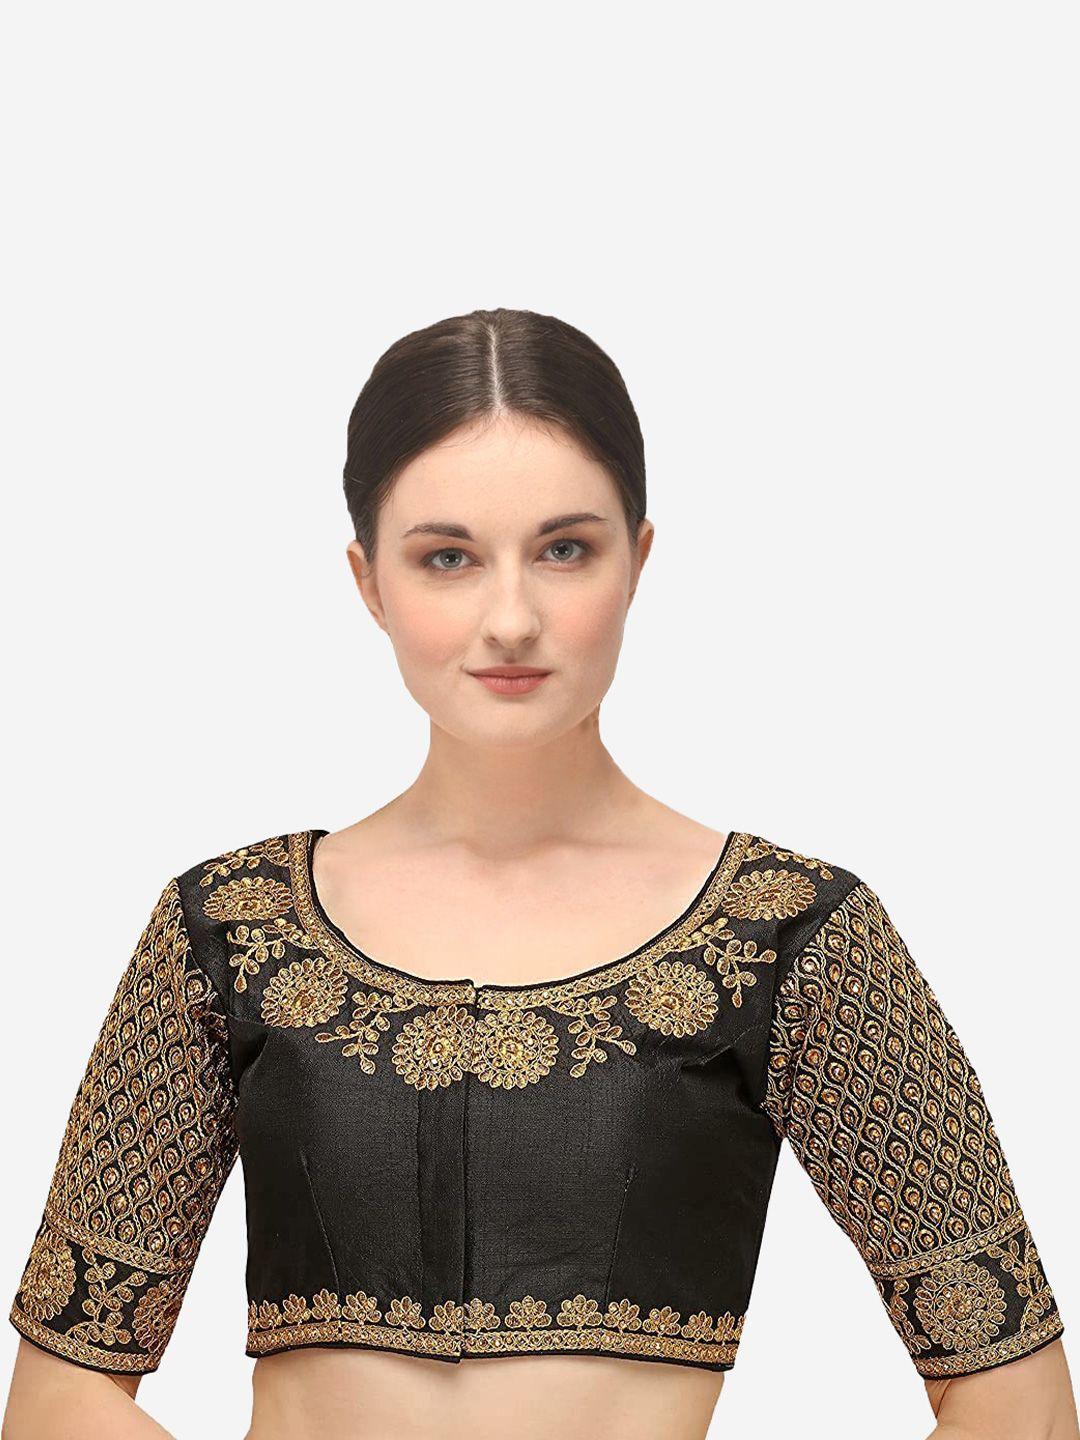 sumaira tex women black & gold-colored embroidered readymade saree blouse